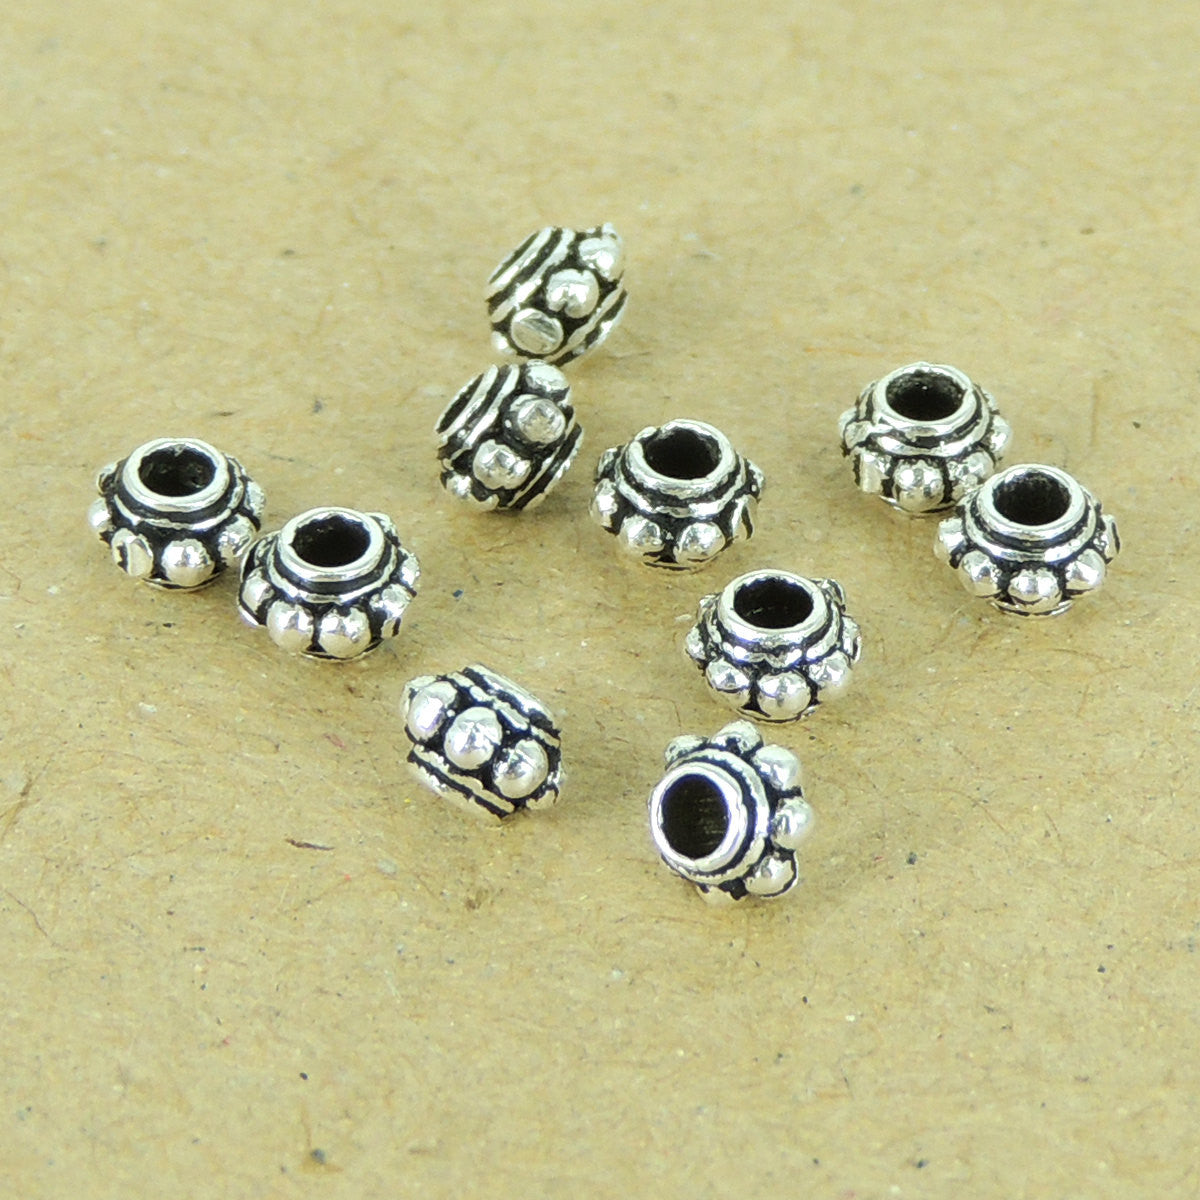 10 PCS Vintage Detail Spacer Beads - S925 Sterling Silver WSP330X10